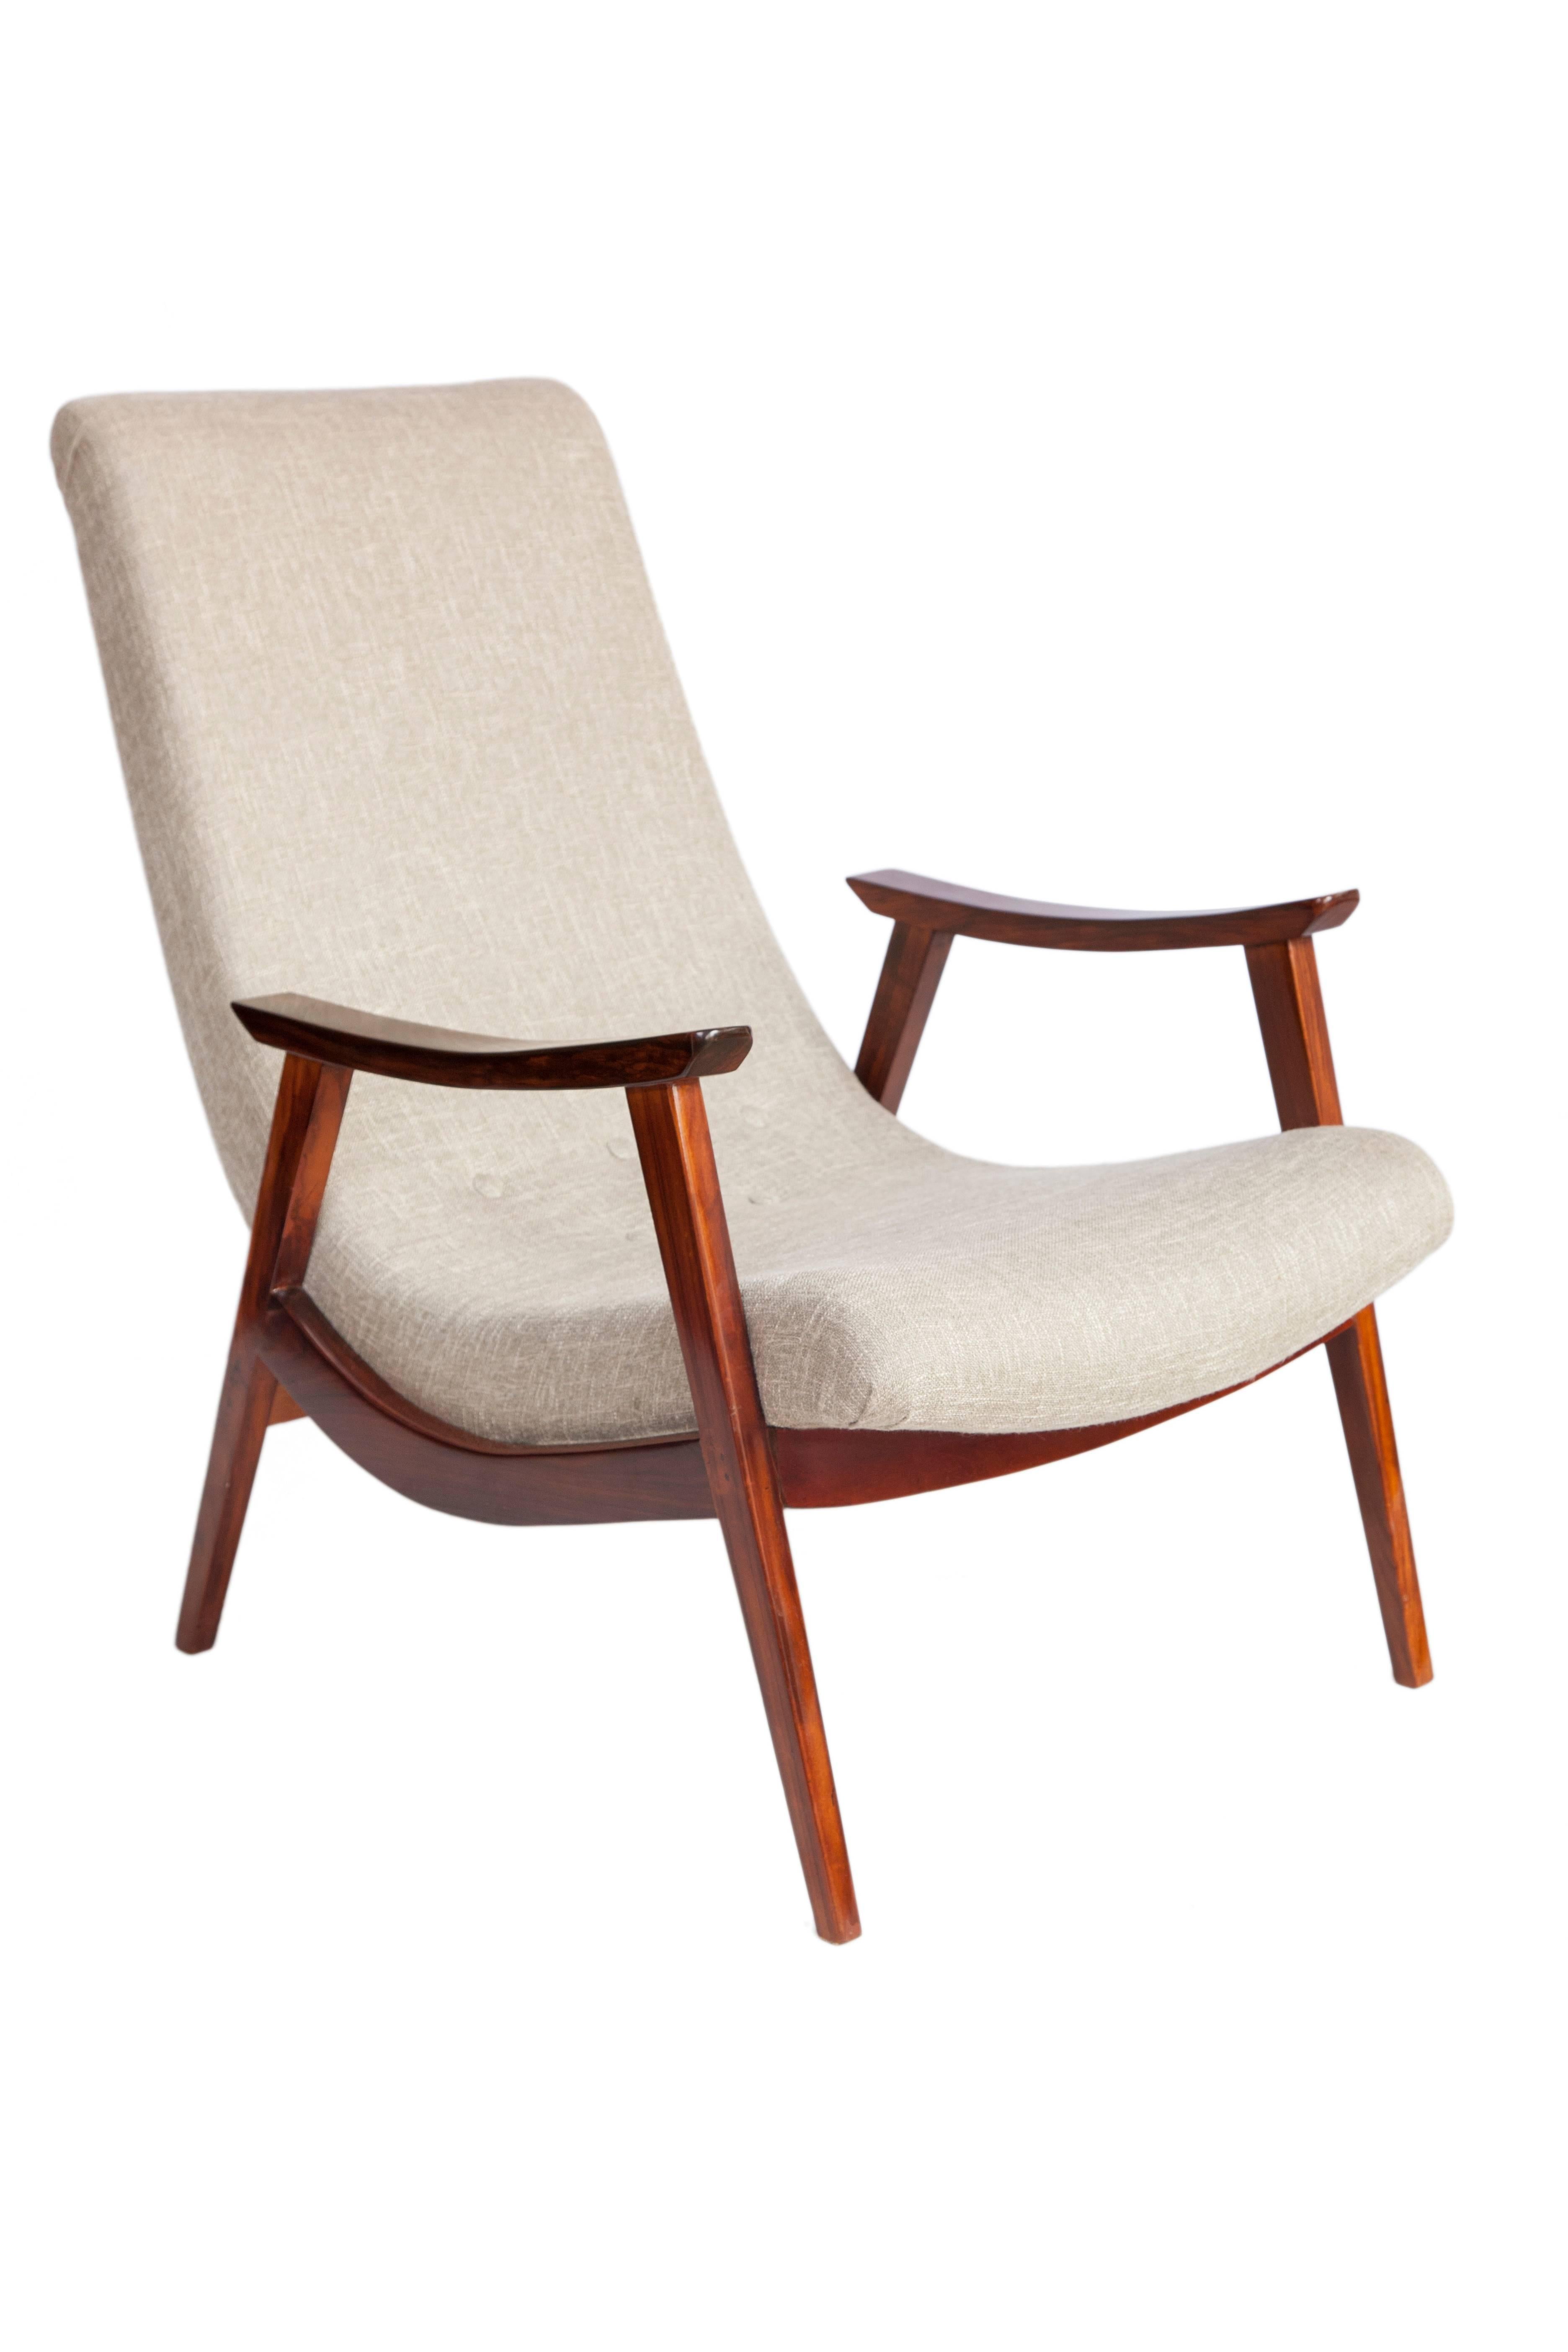 Brazilian modern armchair designed by Gelli, circa 1950. Produced in Jacaranda wood with recently re-upholstered seat in beige linen. Features gently curved front legs and carved armrests. The chair remains in good vintage condition.